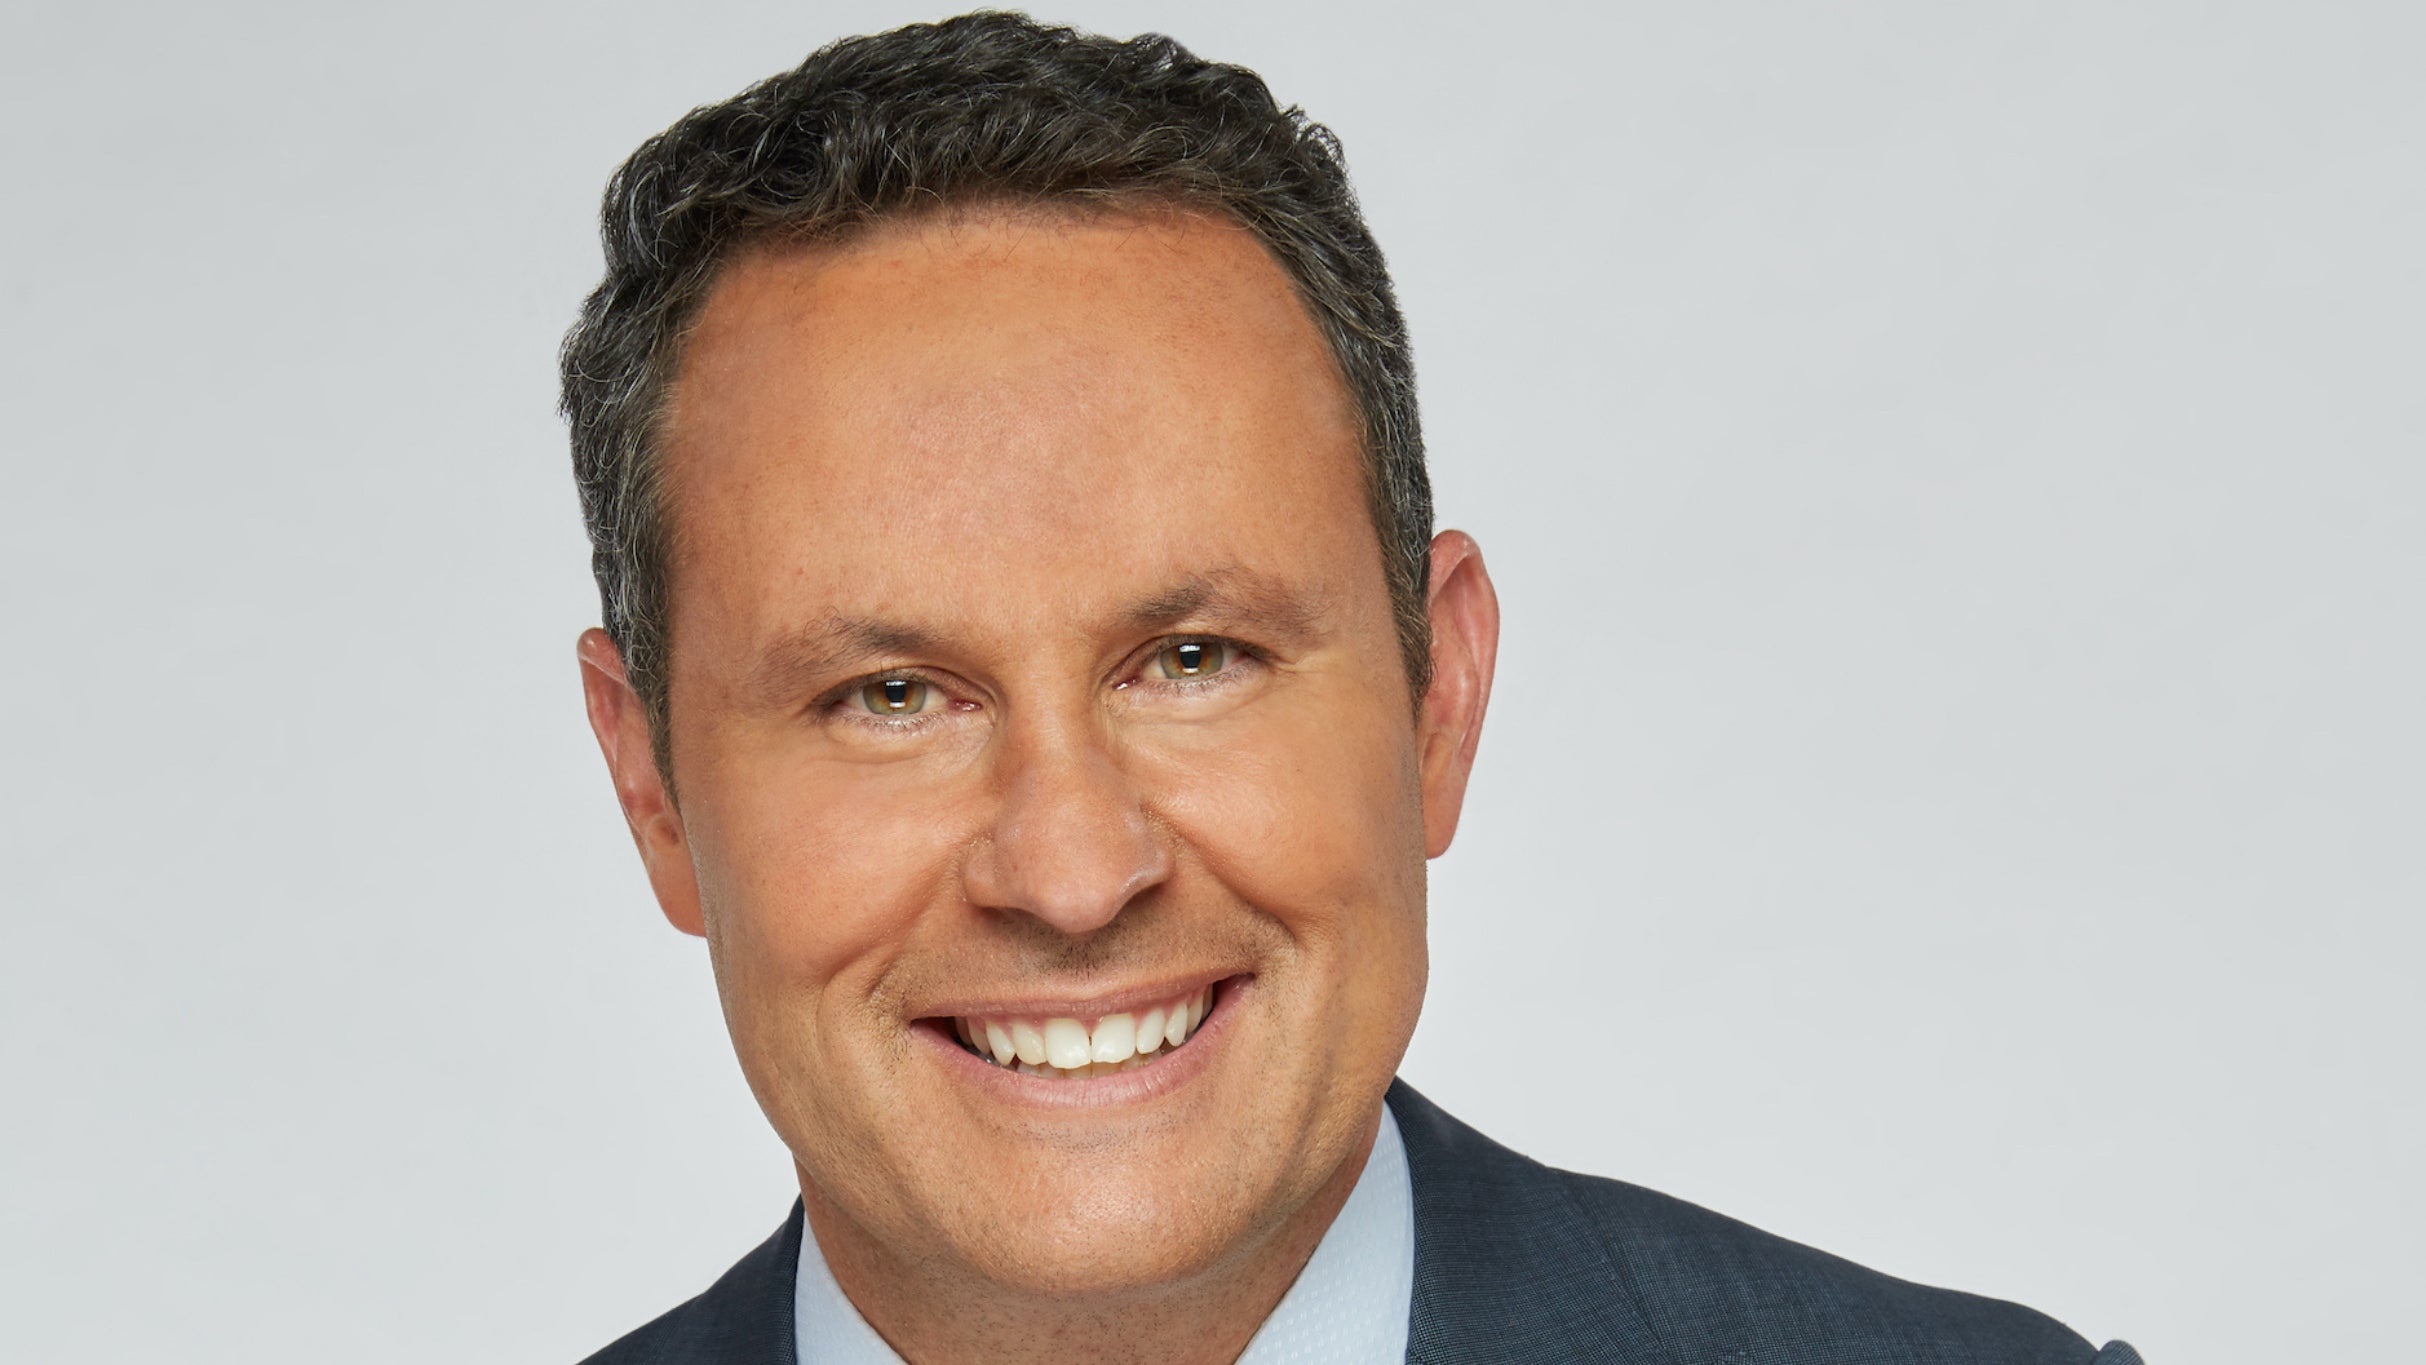 Brian Kilmeade: The History, Liberty and Laughs Tour presales in Indianapolis